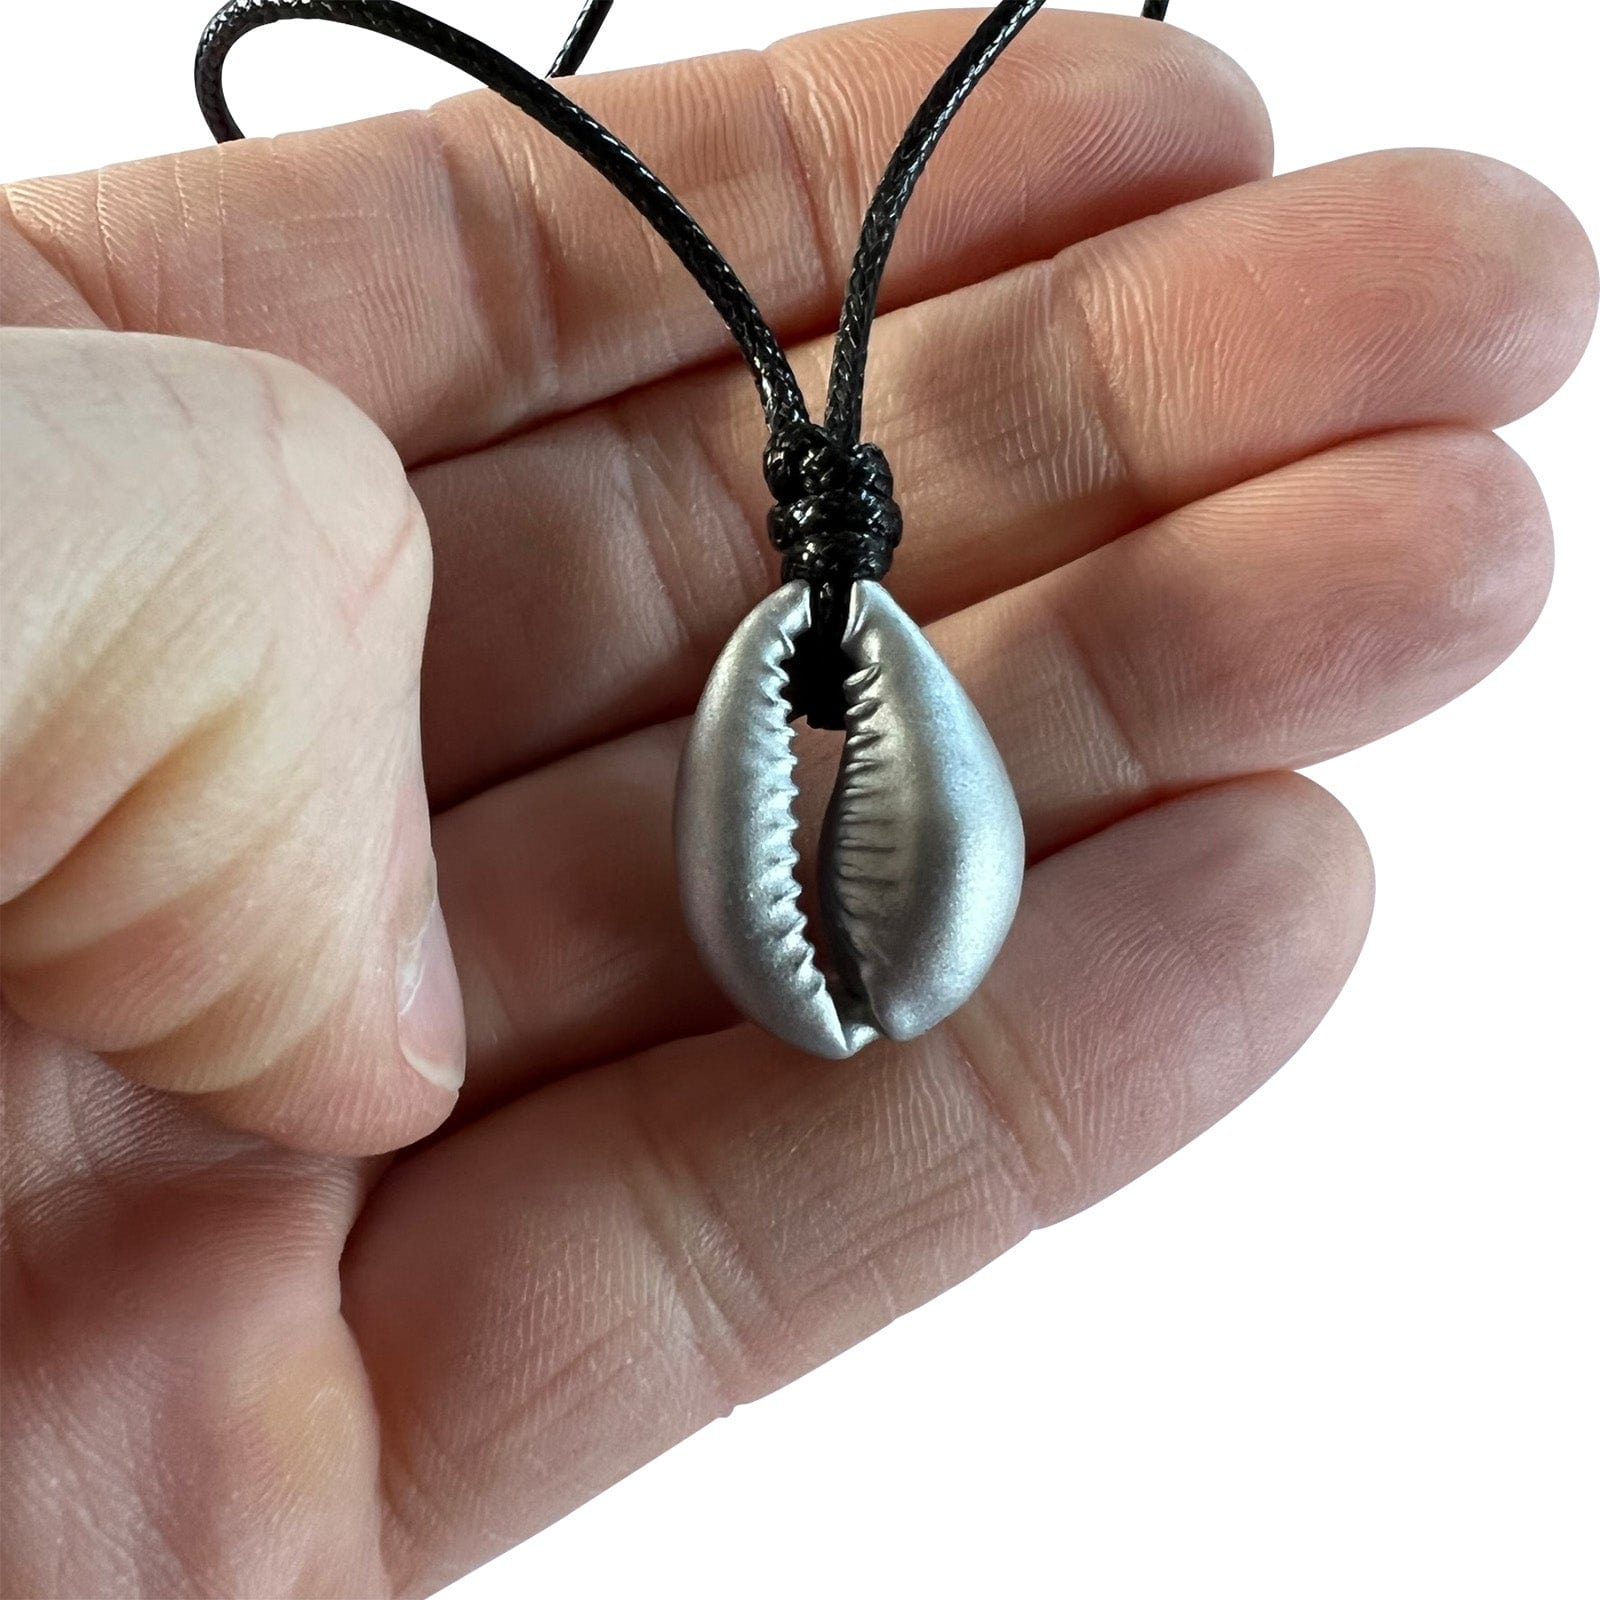 Silver Colour Shell Pendant Necklace Black Cord Chain Man Woman Boy Girl Jewelry